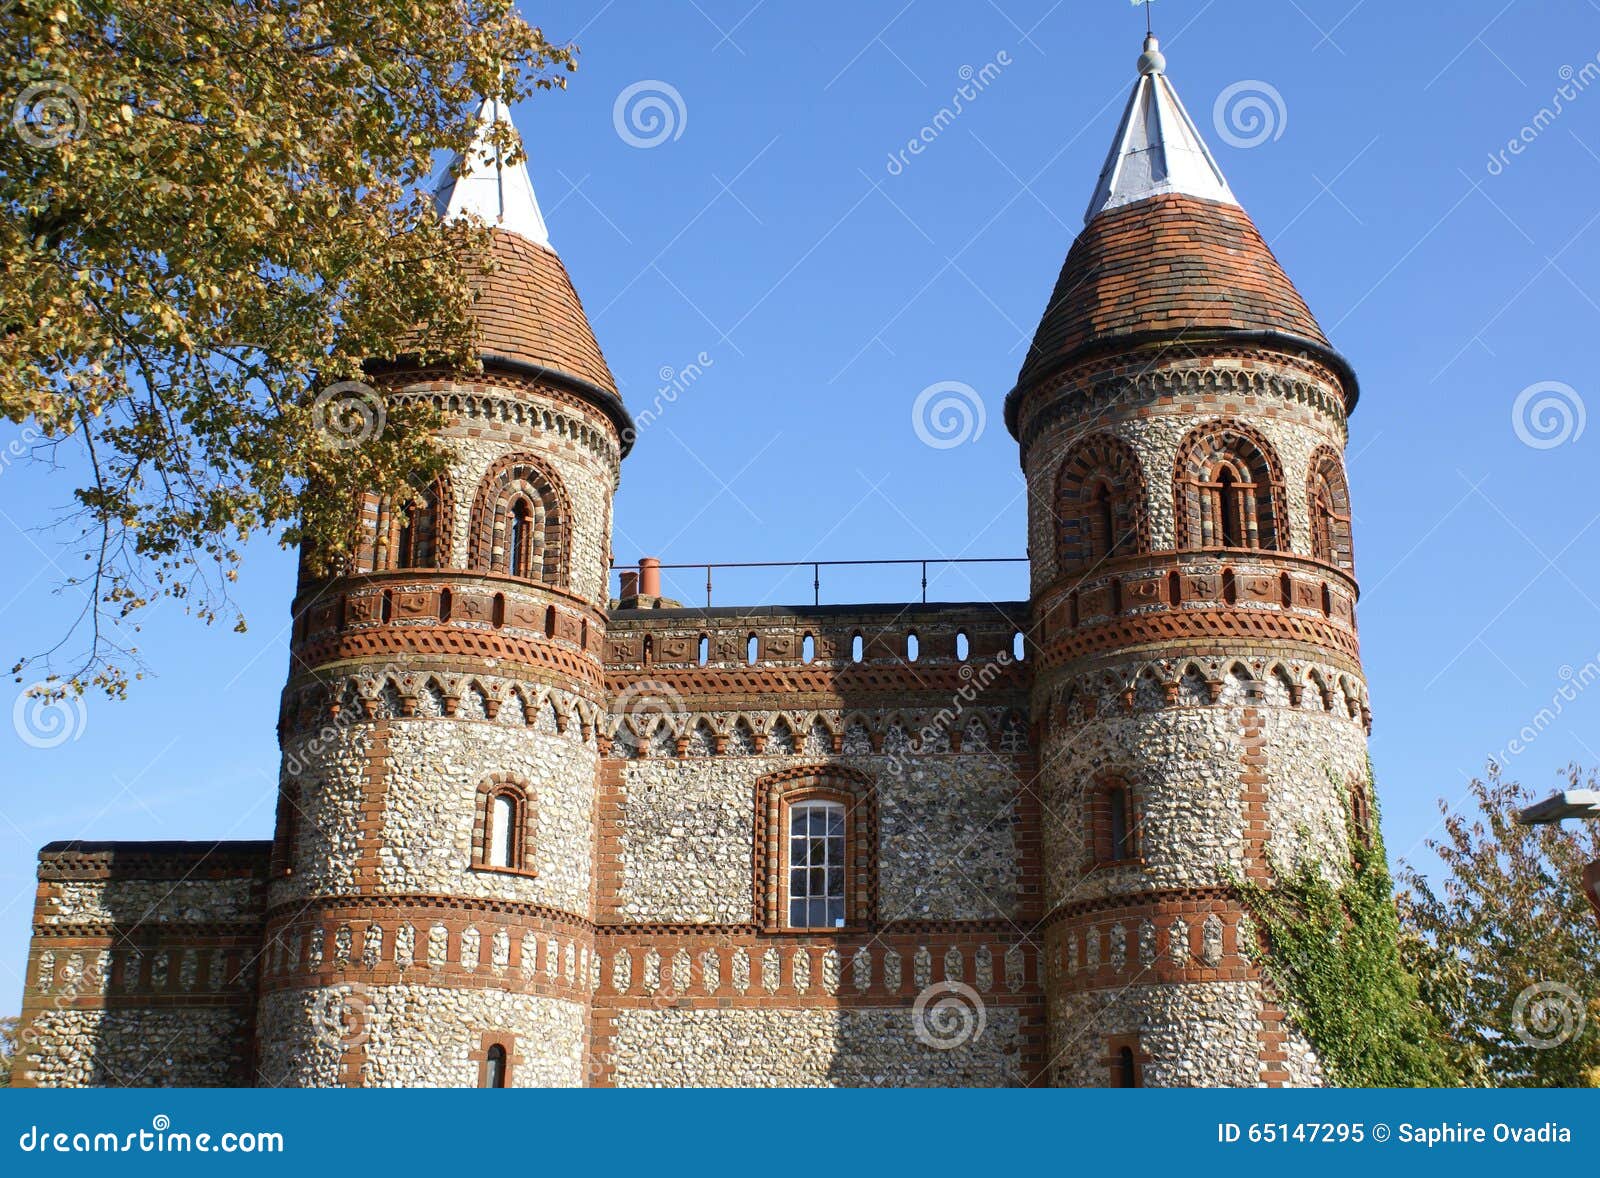 Conical towers stock image. Image of spires, british - 65147295